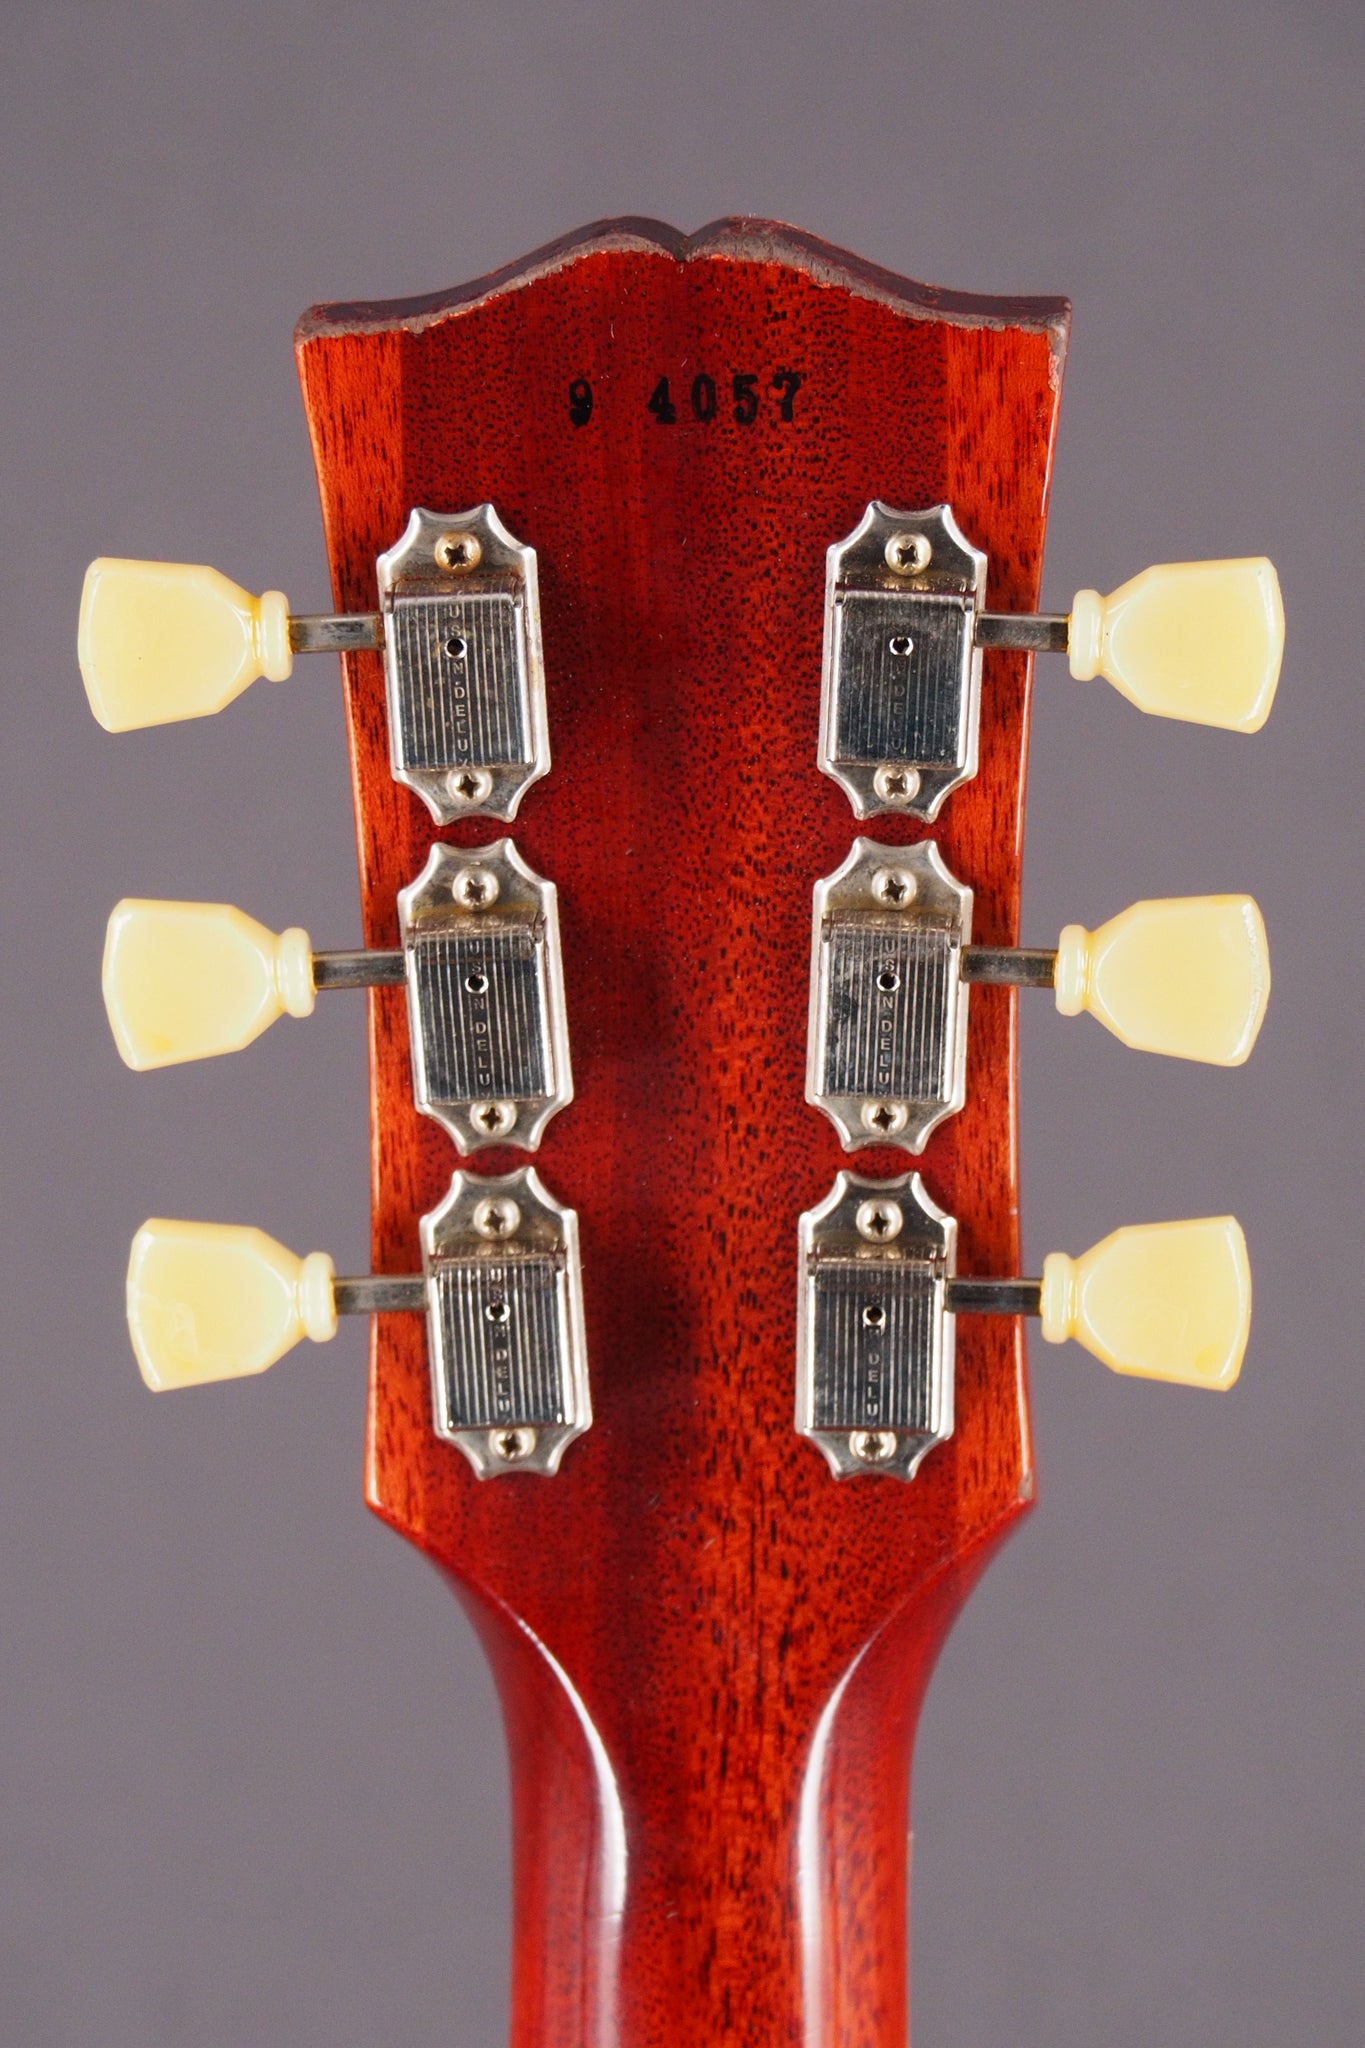 '59 Les Paul Standard Reissue Limited Edition Murphy Lab Aged with Brazilian Rosewood - Tom’s Tri-Burst